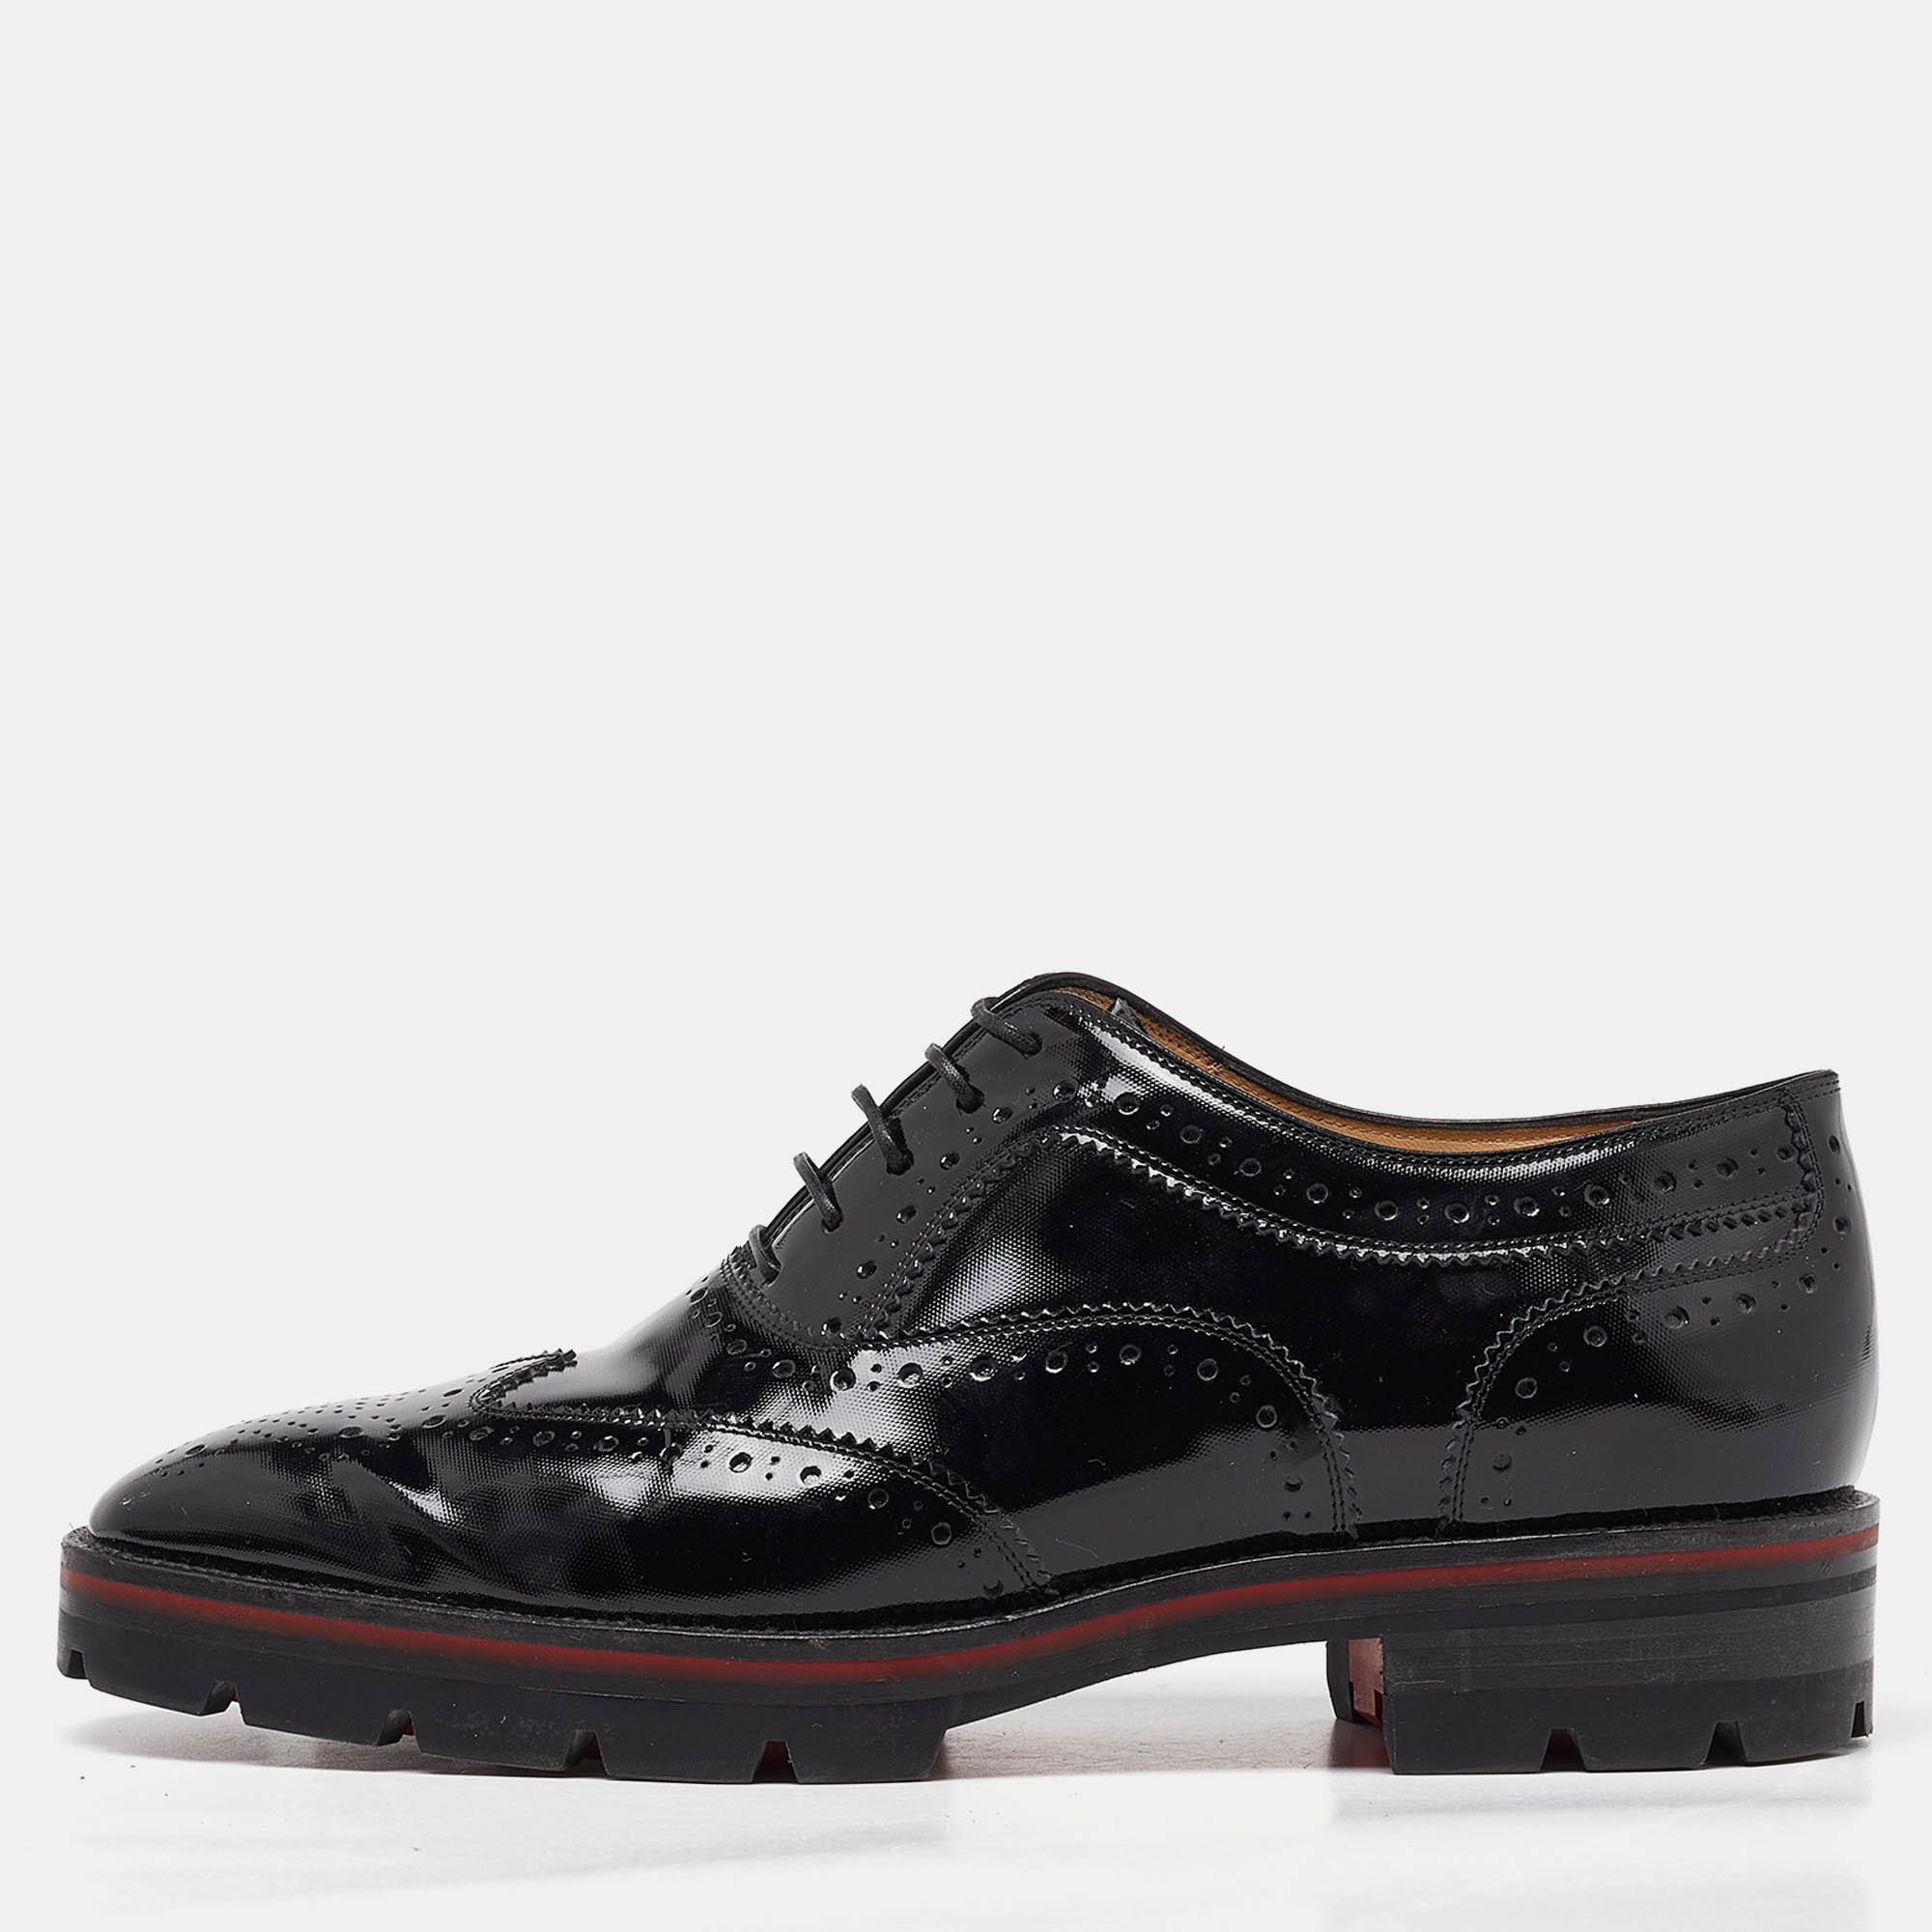 Christian louboutin black brogue patent leather charletta lace up oxfords size 38